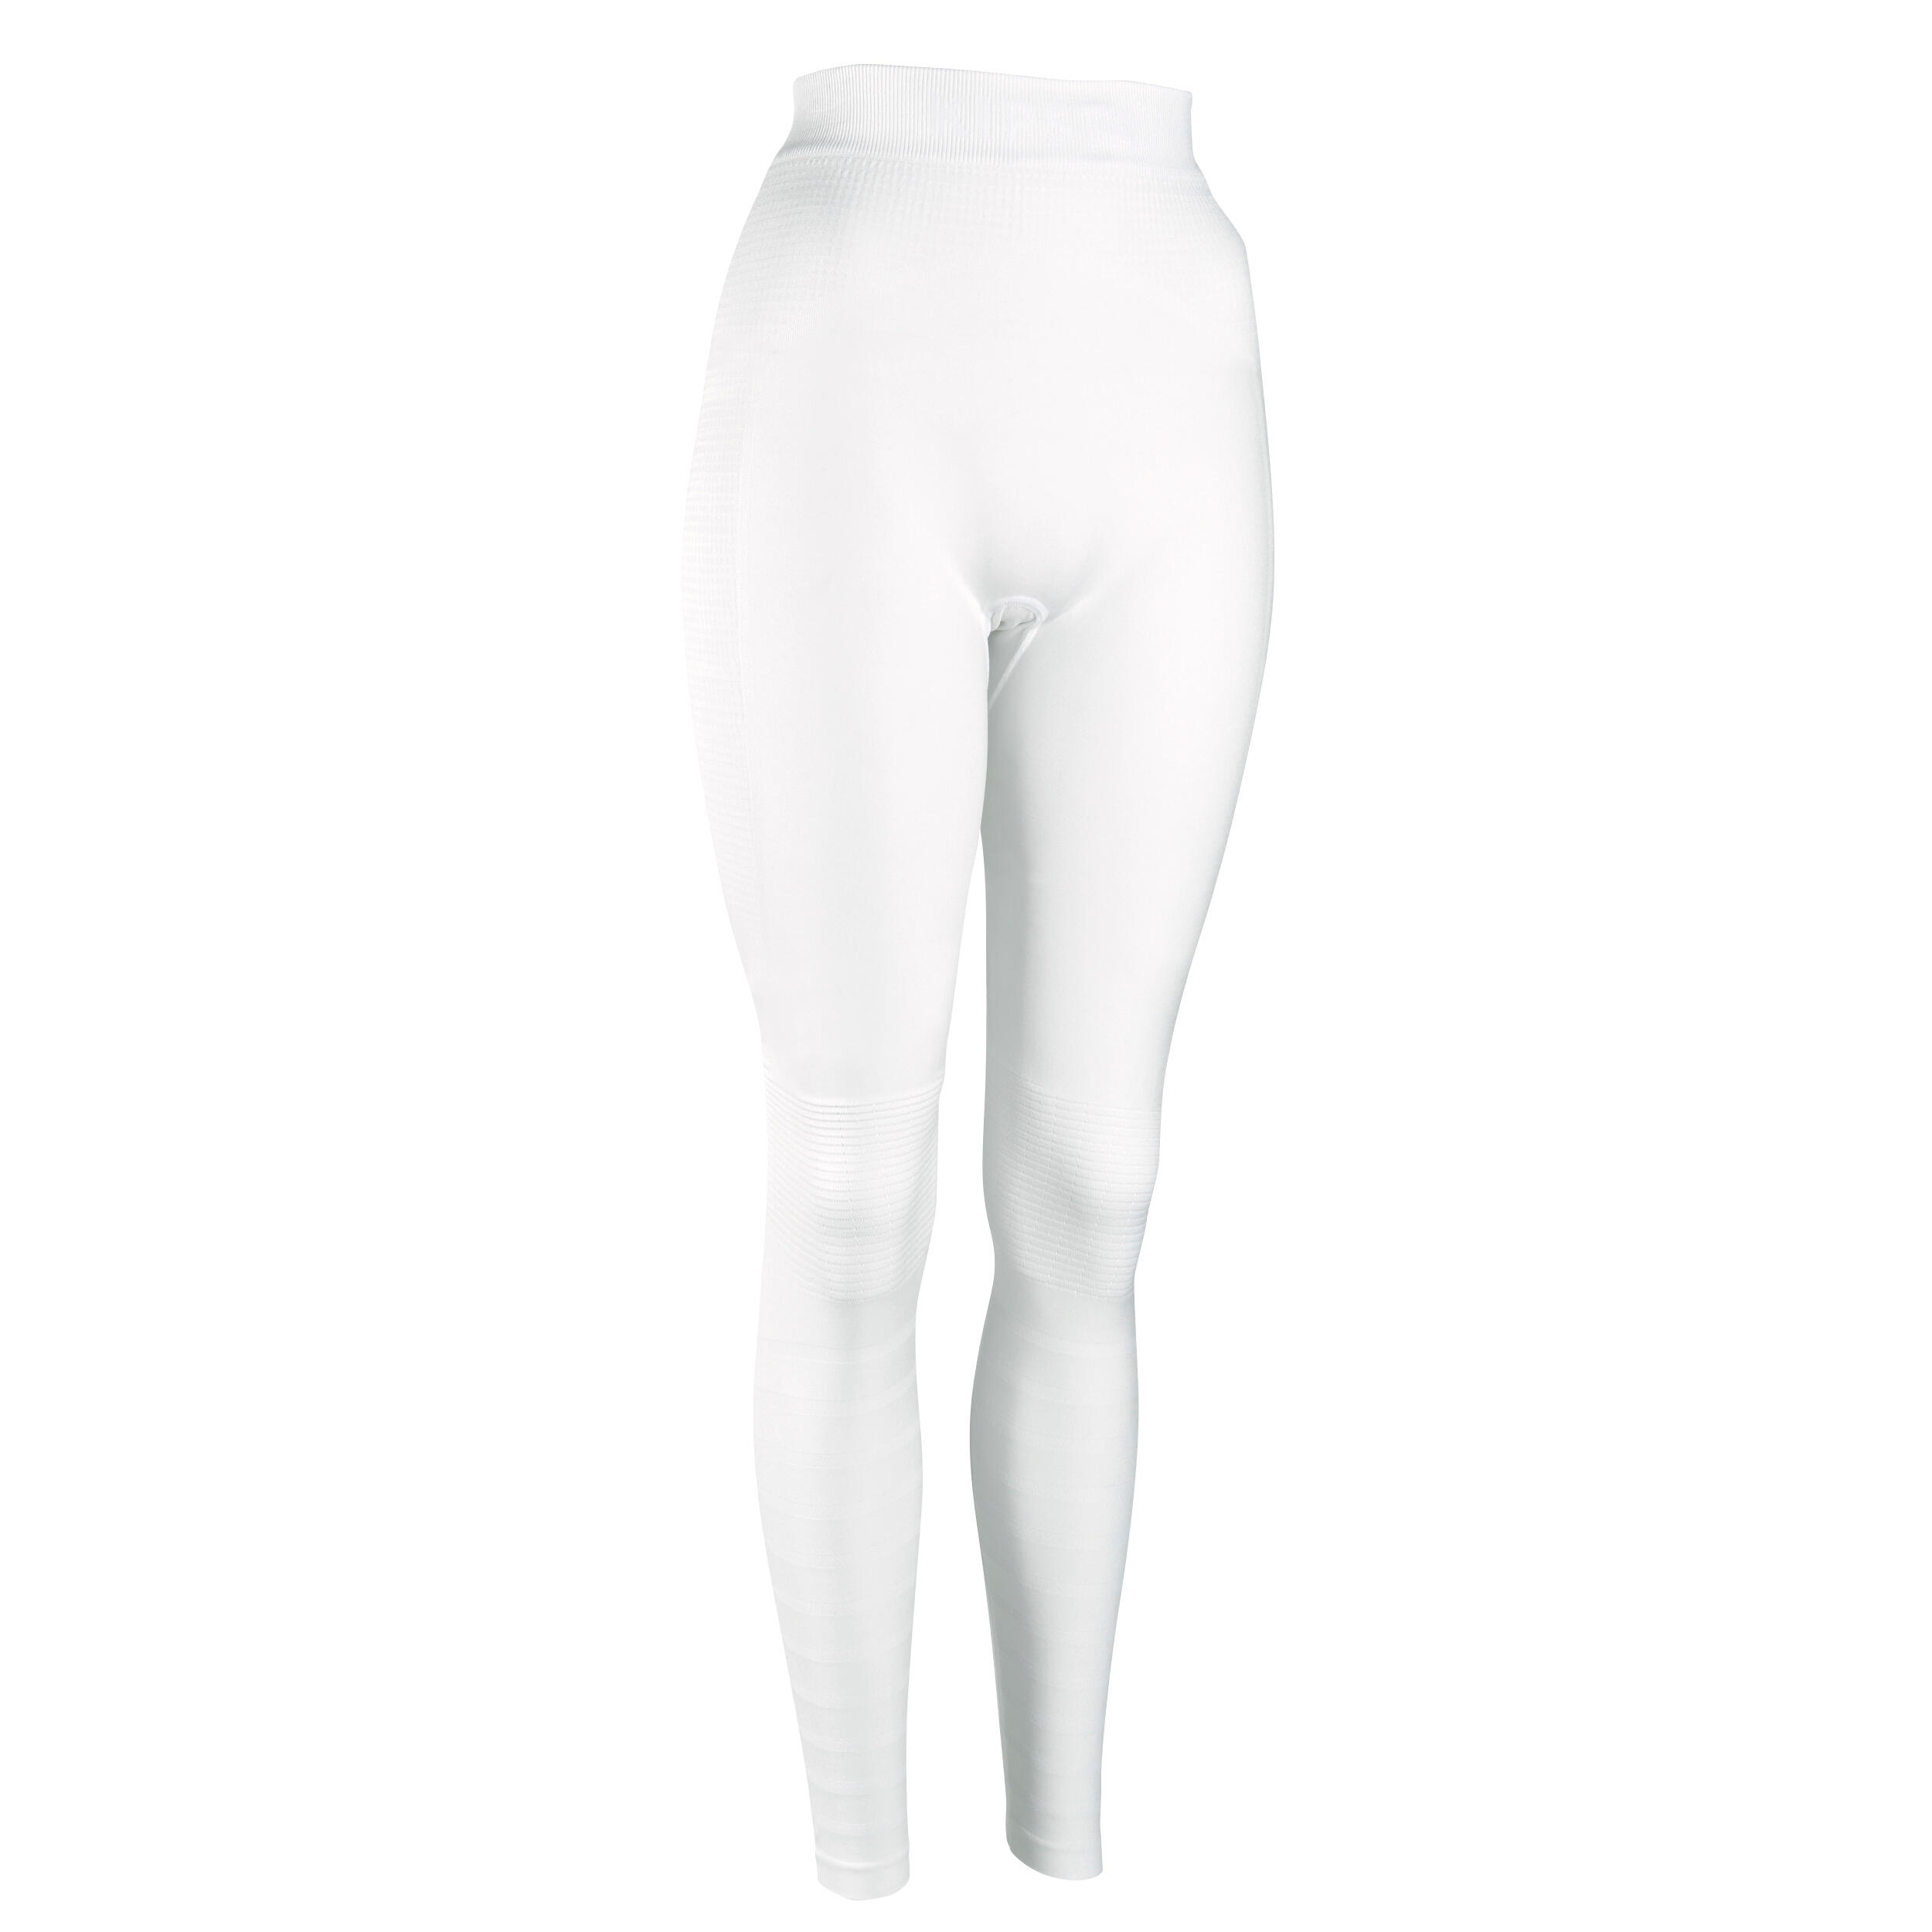 Adult Thermal Tights Keepdry 500 - White 2/5